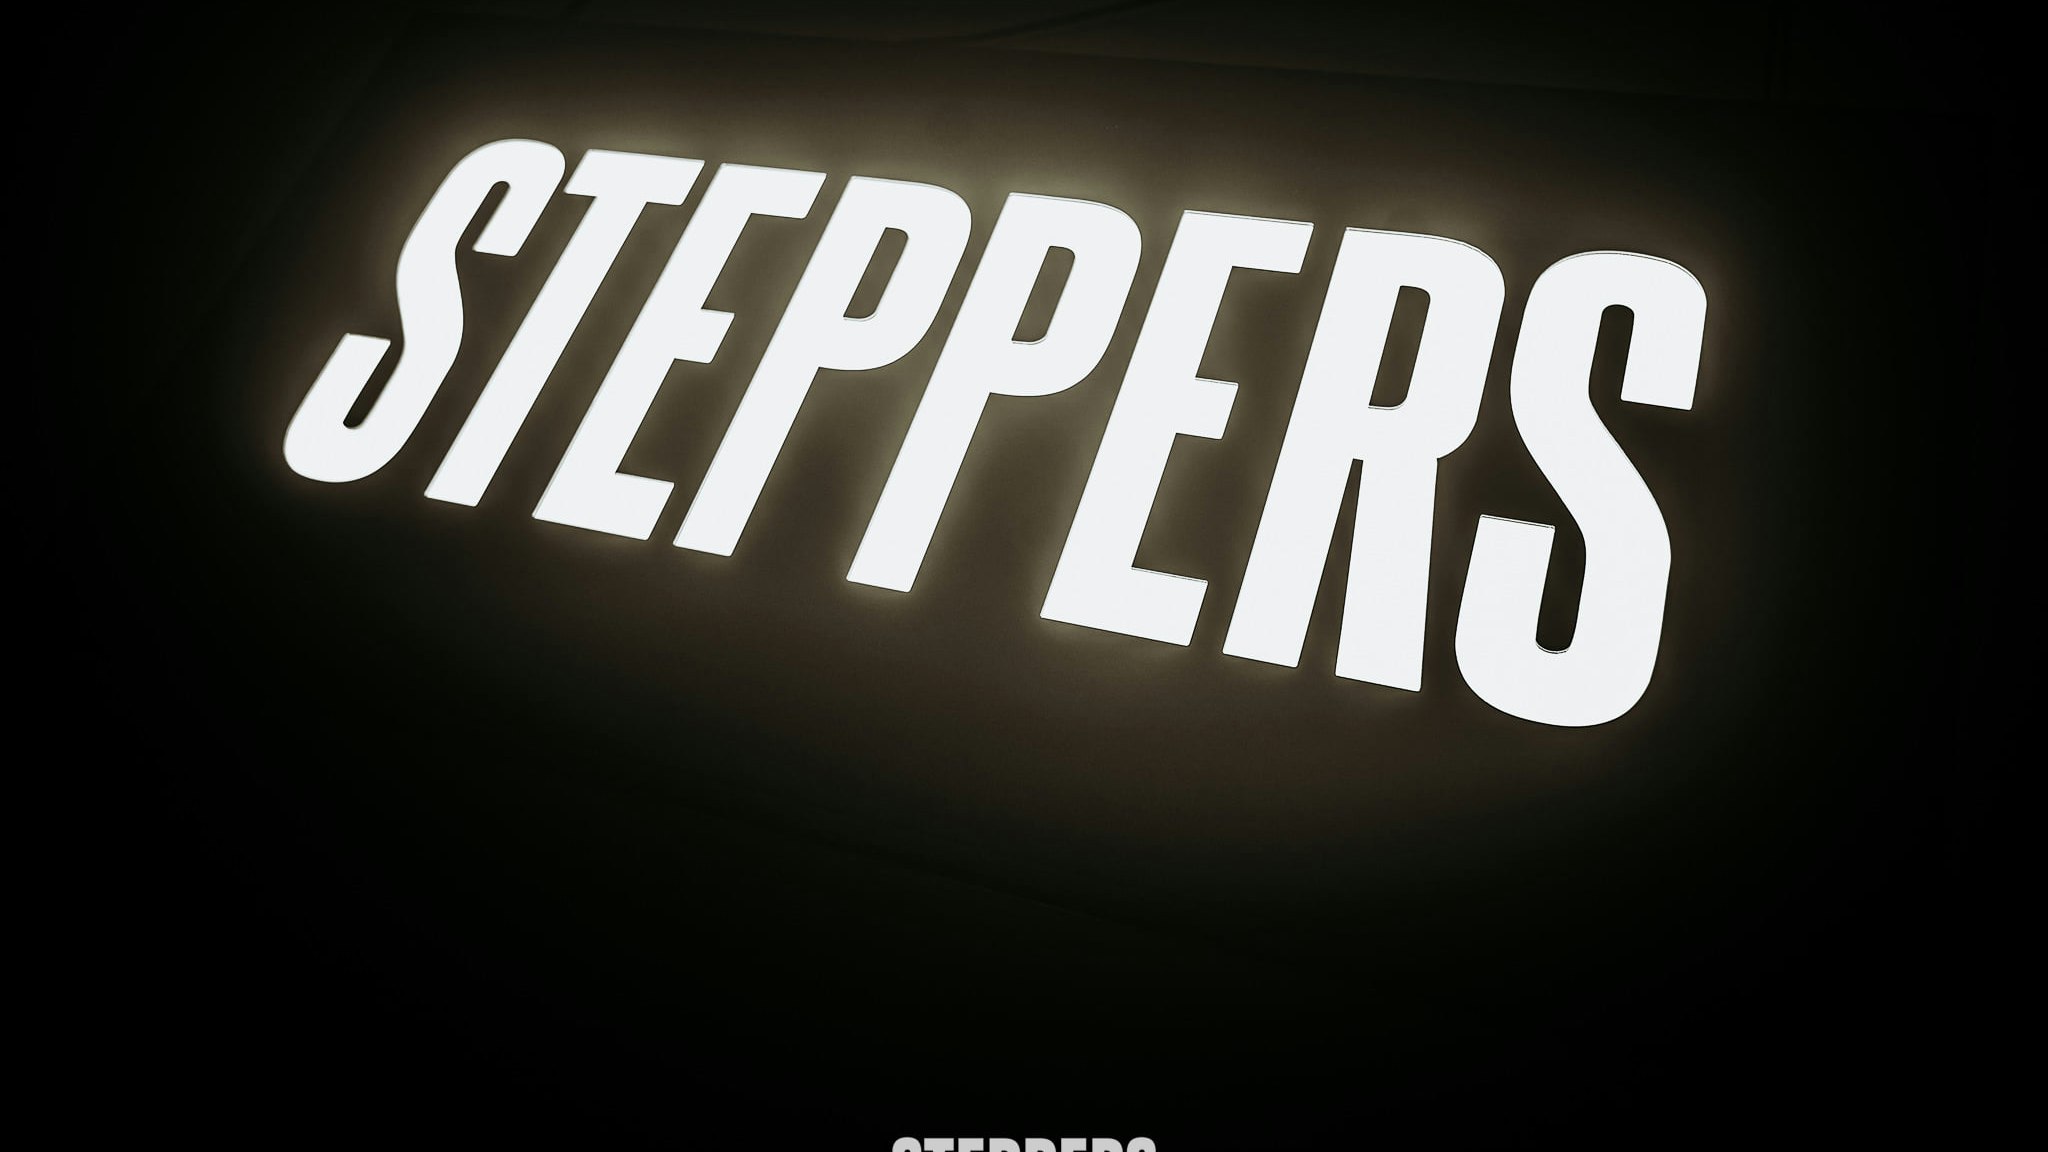 Steppers – Club